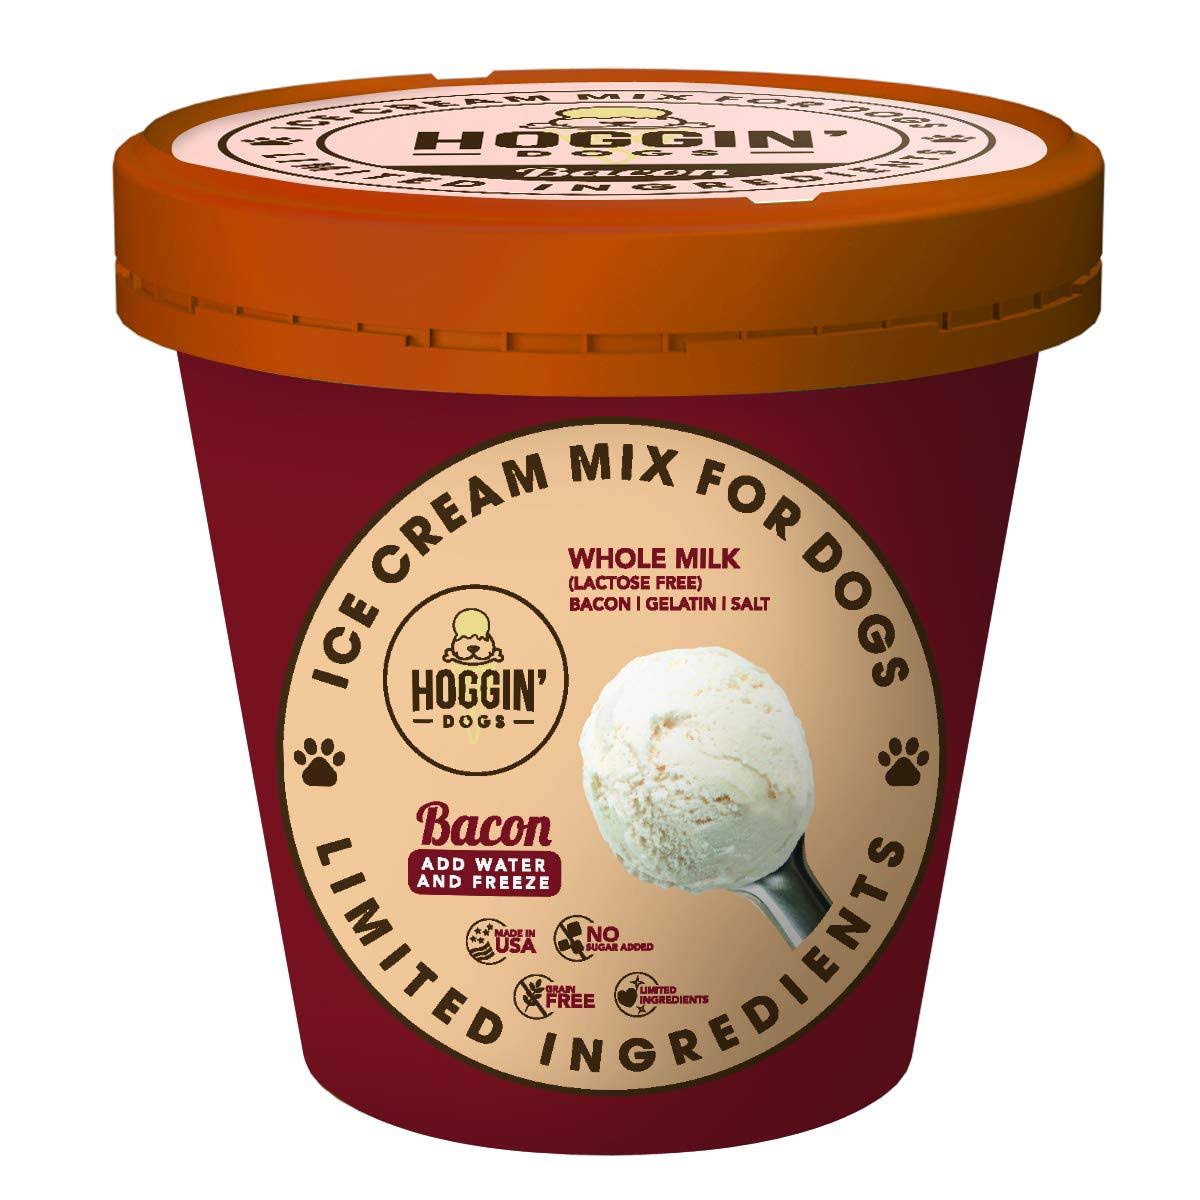 Hoggin' Dogs Ice Cream Mix For Dogs (Bacon)